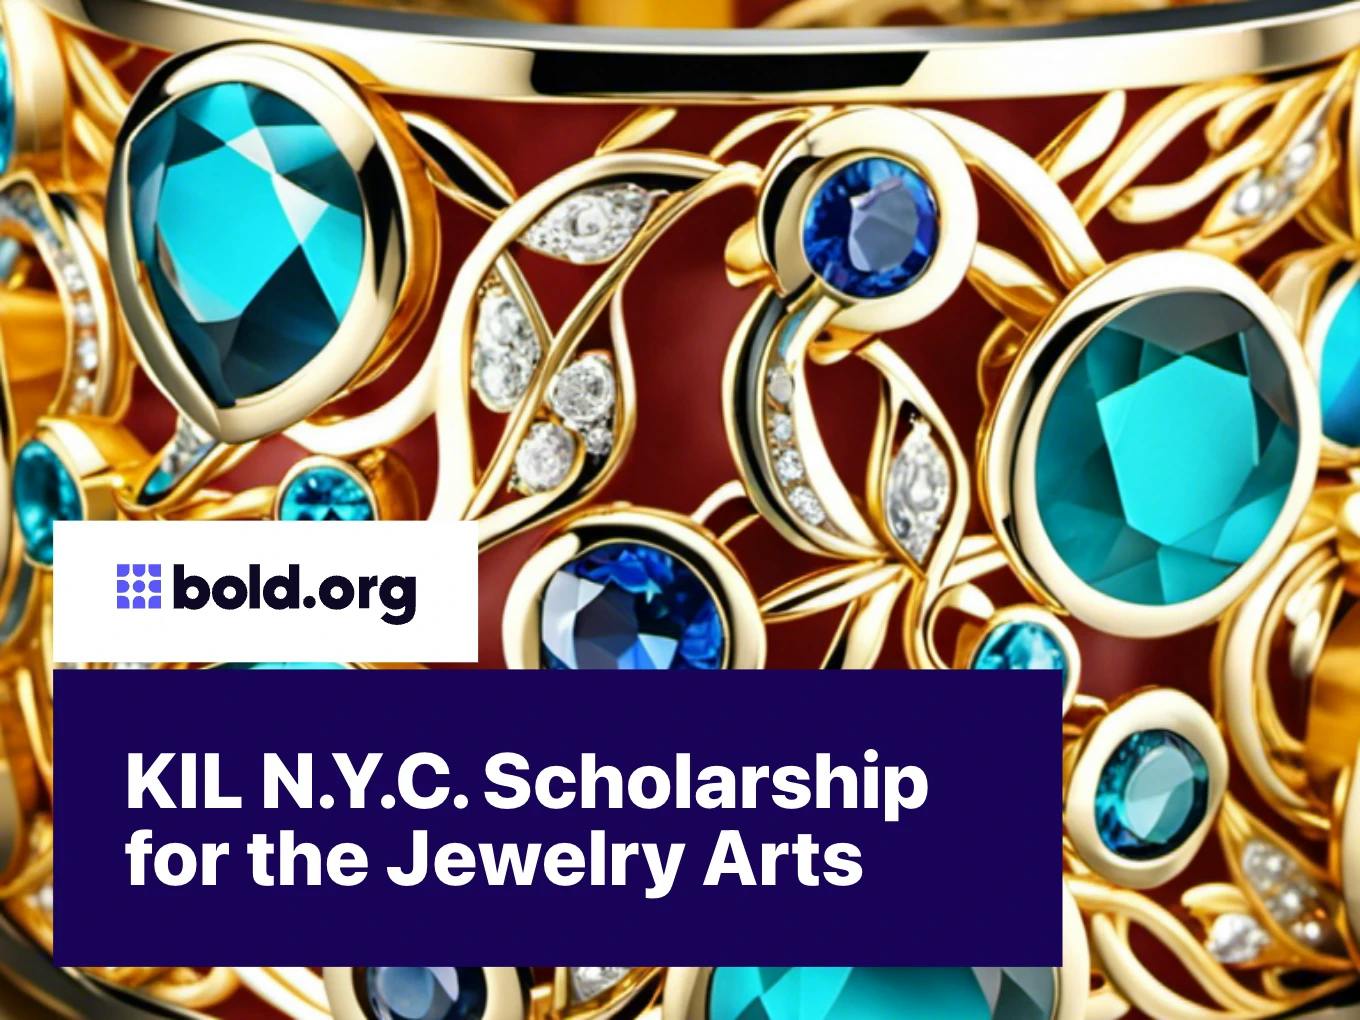 KIL N.Y.C. Scholarship for the Jewelry Arts